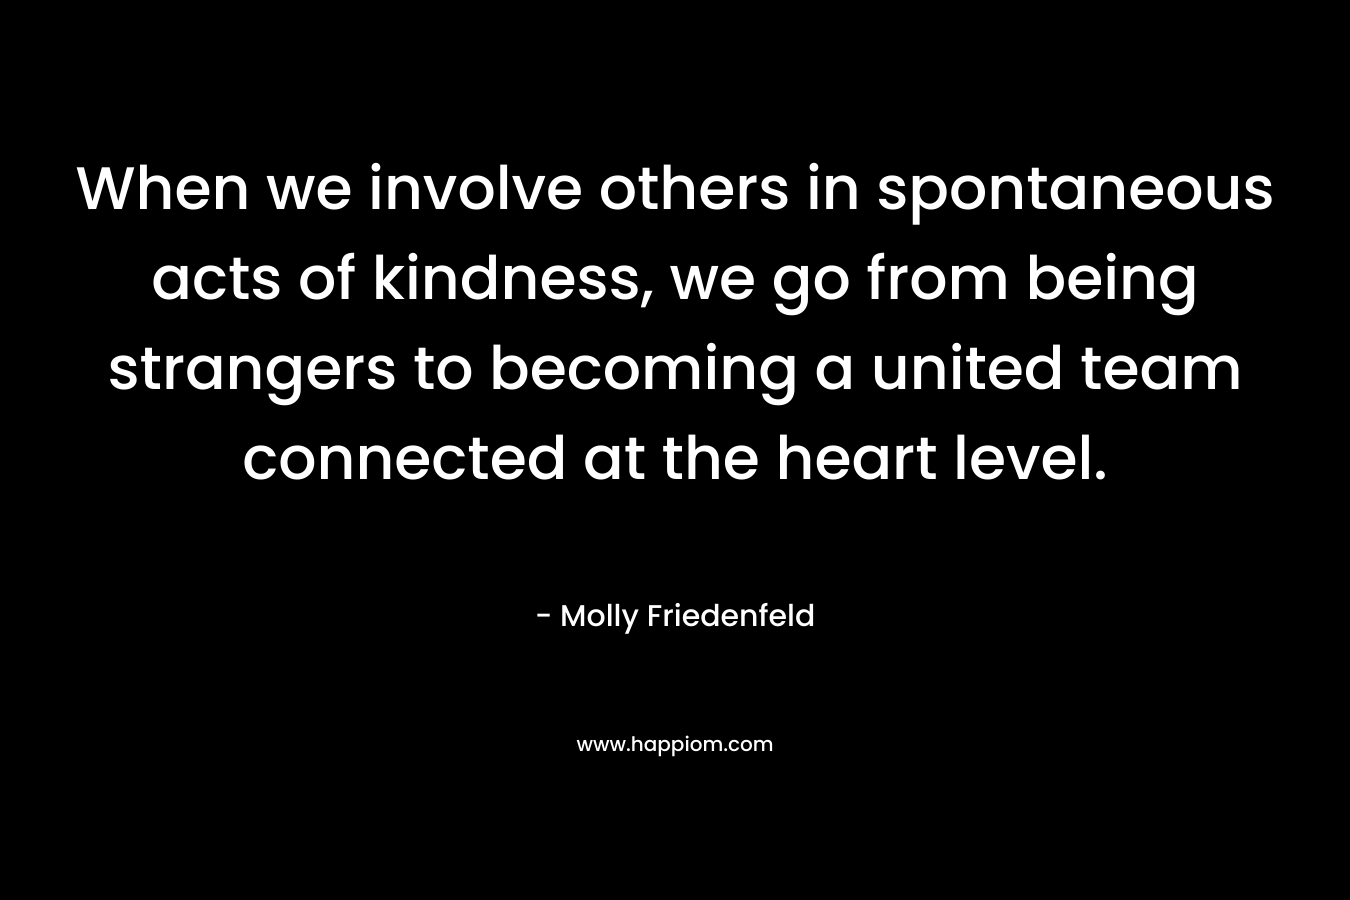 When we involve others in spontaneous acts of kindness, we go from being strangers to becoming a united team connected at the heart level.